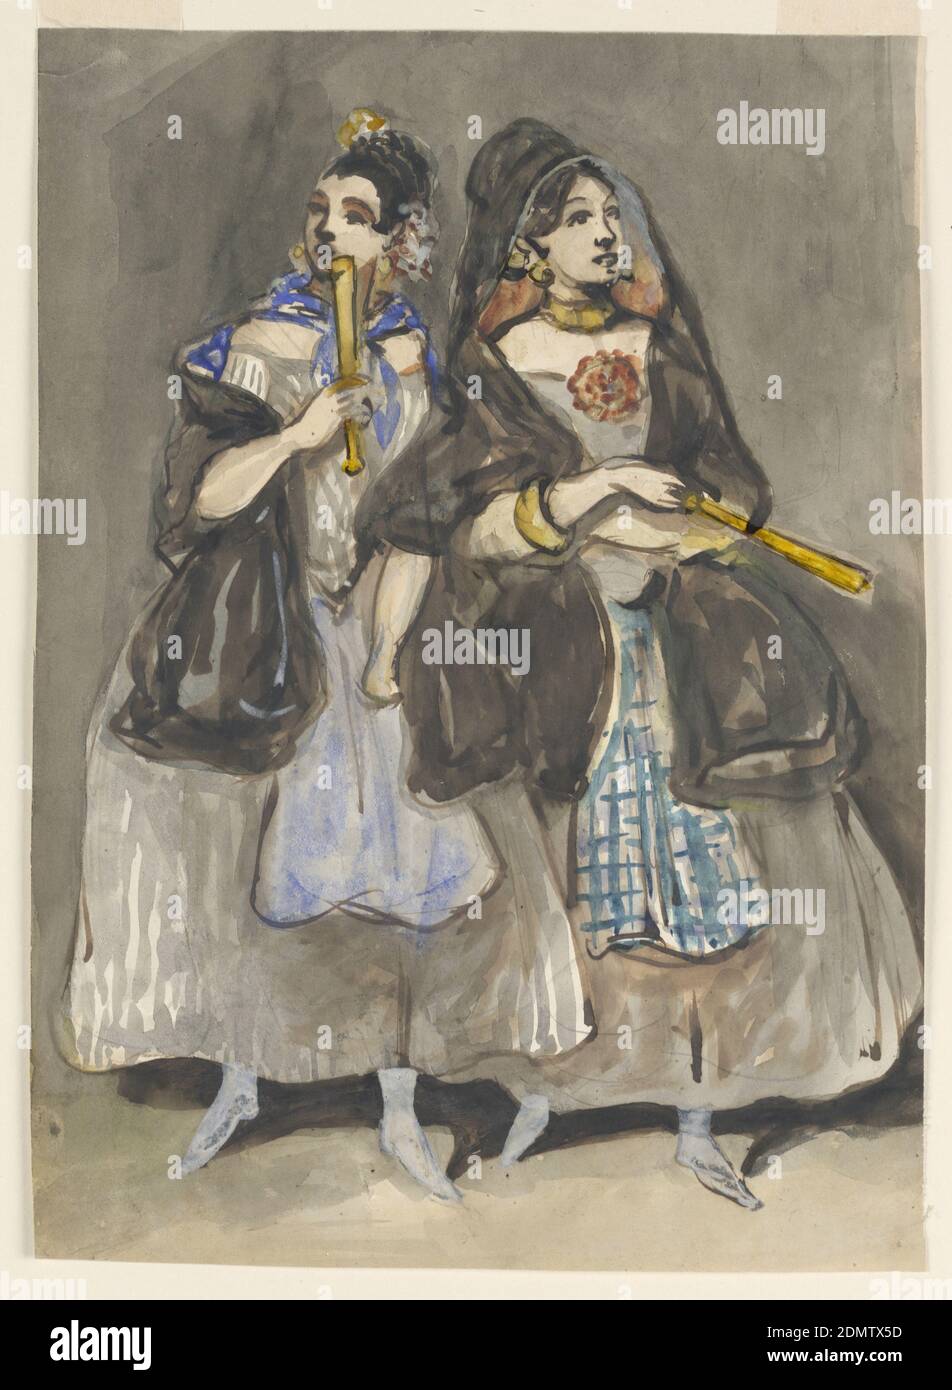 Two Spanish Women Promenading, Constantin Guys, French, 1802 – 1892, Pen and brown ink, brush and watercolor, gray wash on paper, Vertical rectangle. Two Spanish women promenading, both wearing gray skirts, blue aprons, black scarves, gold jewelry and holding fans with gold-colored sticks. Woman on left wears bright blue scarf and apron; woman on right wears a plaid apron., France, ca. 1860, figures, Drawing Stock Photo